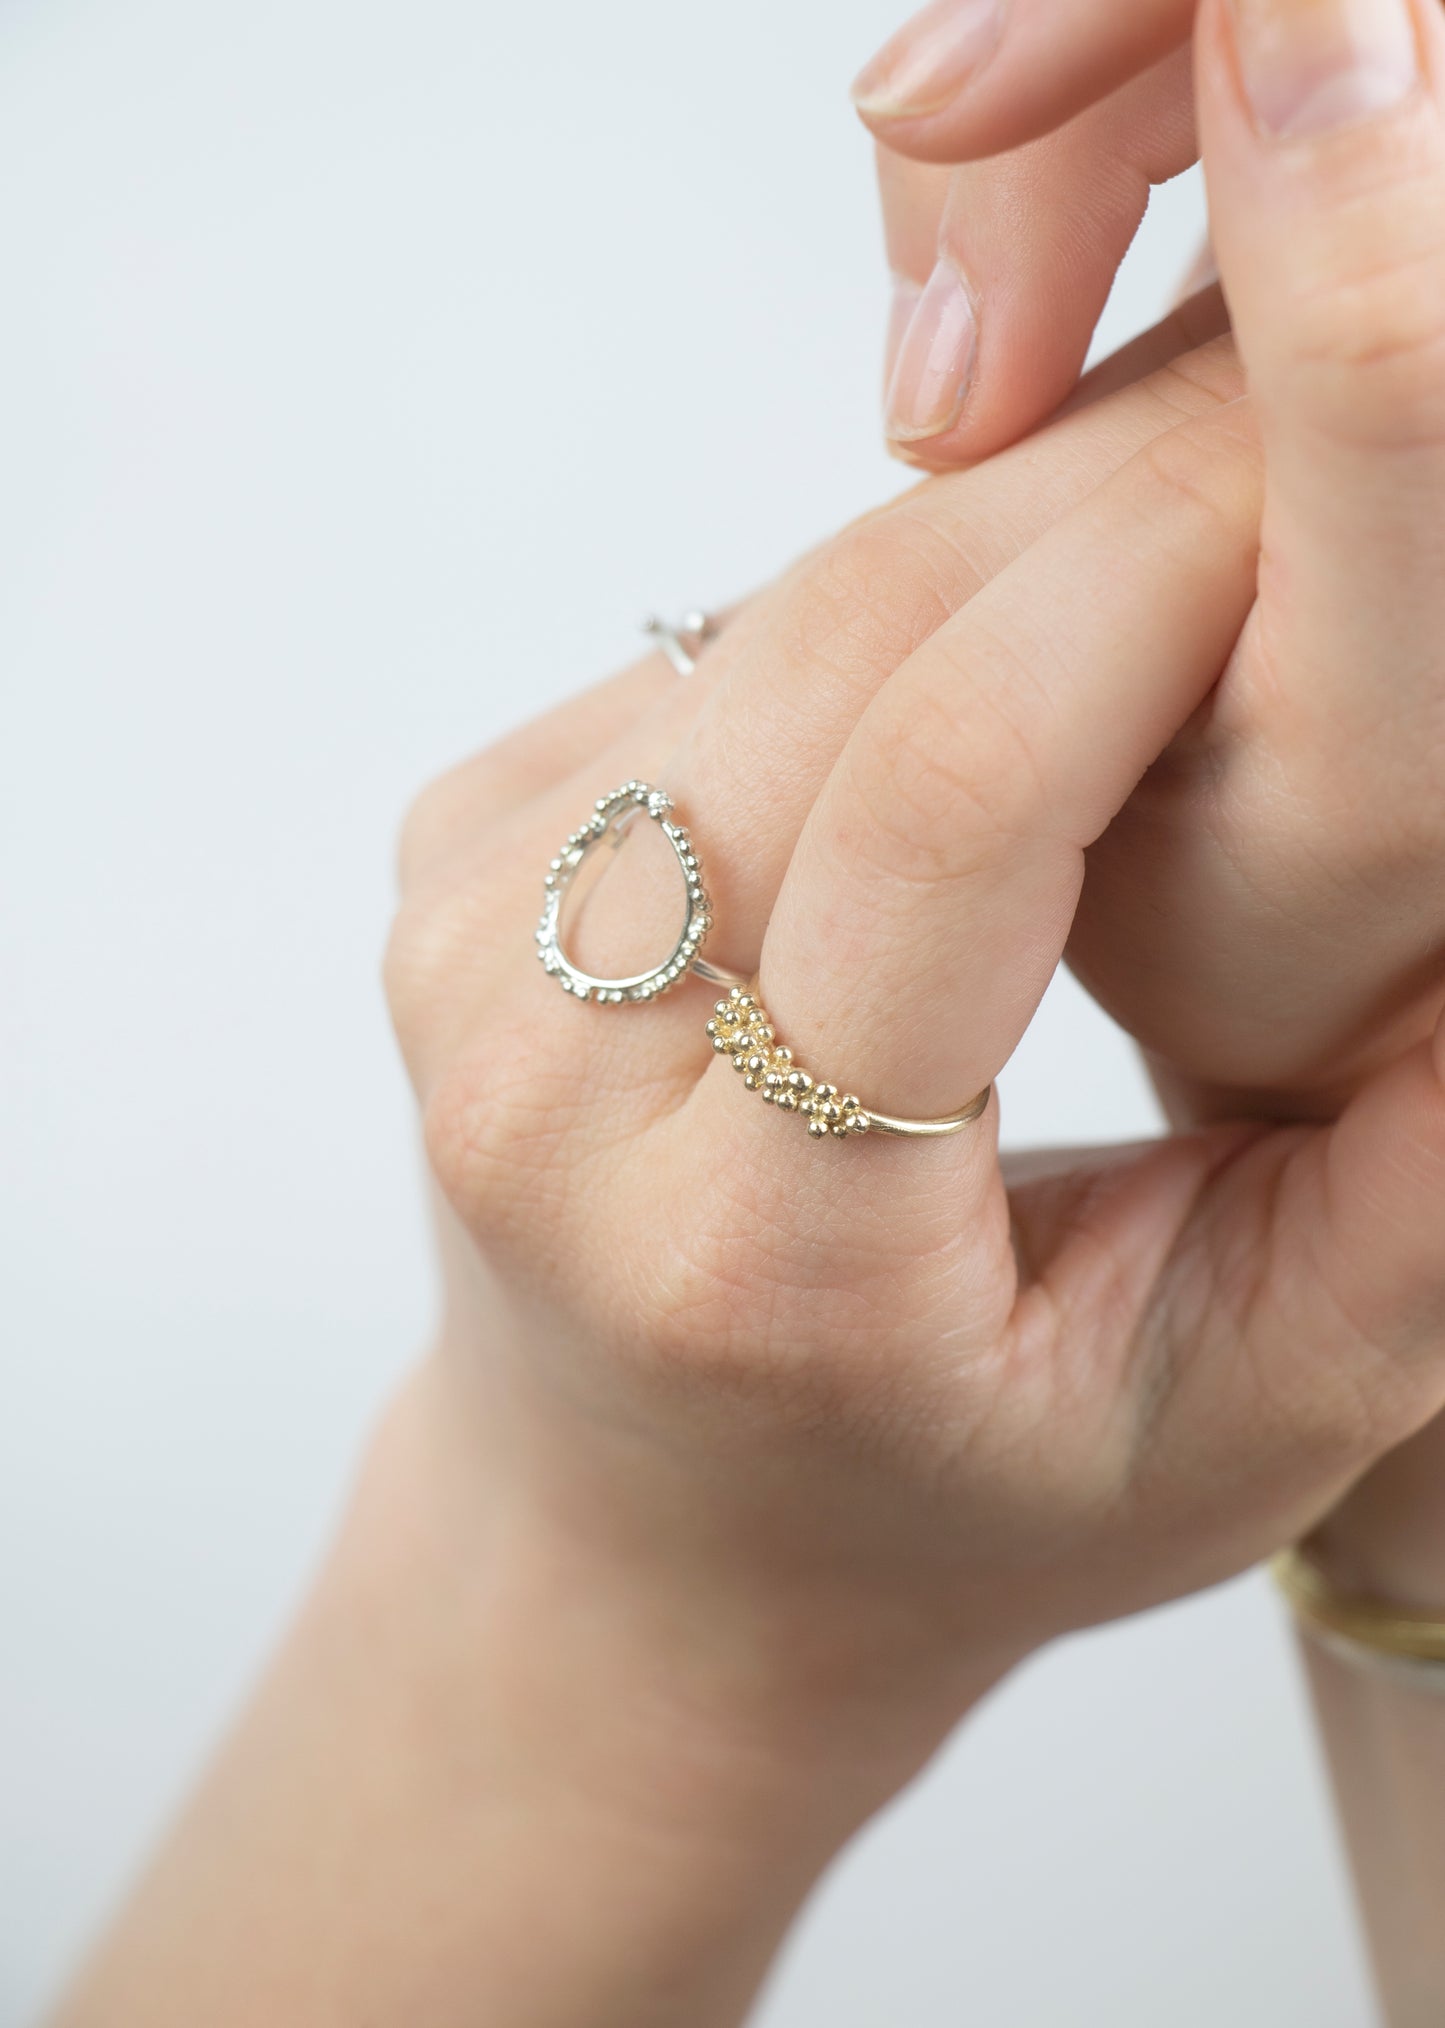 Bubble ring | Sterling Silver - Milly Maunder Designs